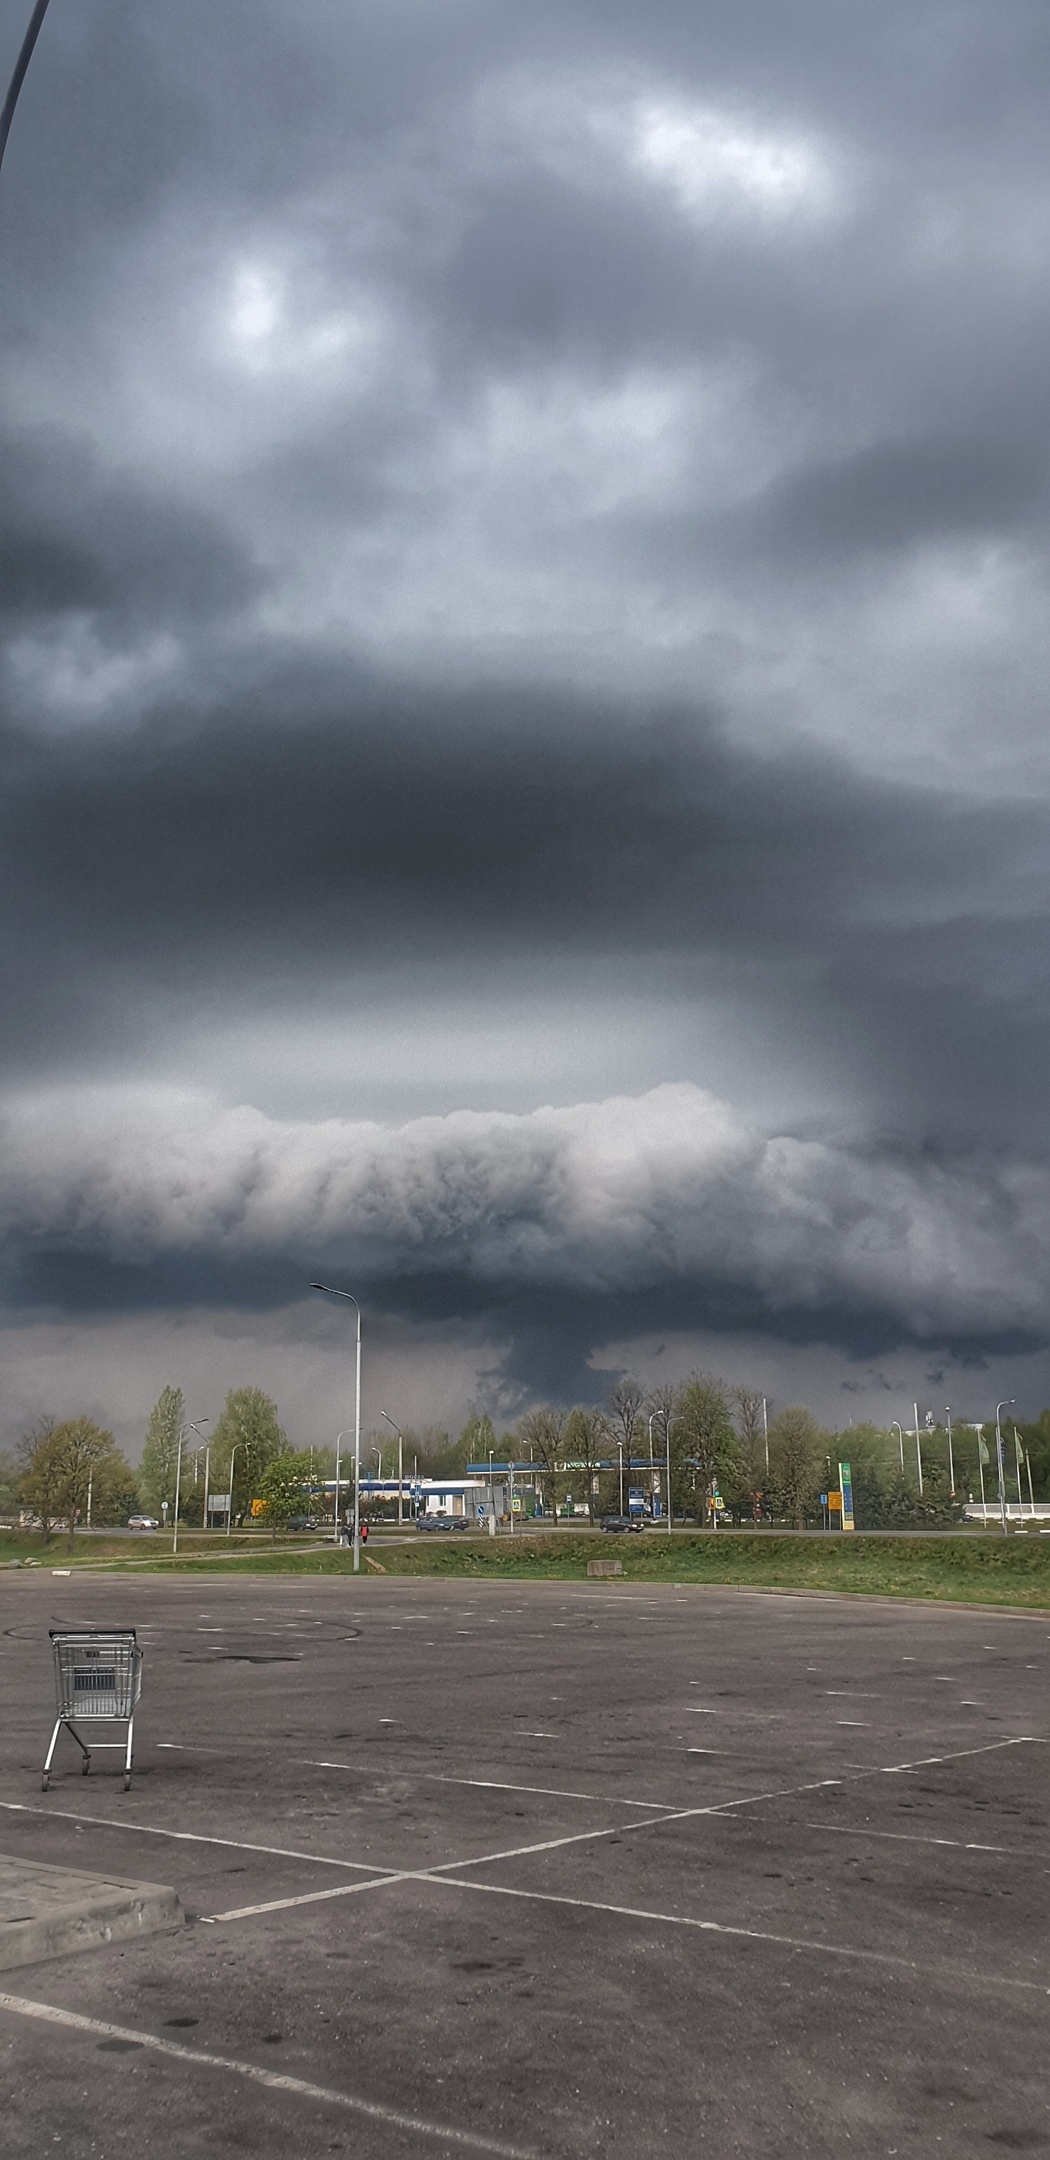 A little cloudy they said - My, Thunderstorm, Weather, The photo, Unusual, Republic of Belarus